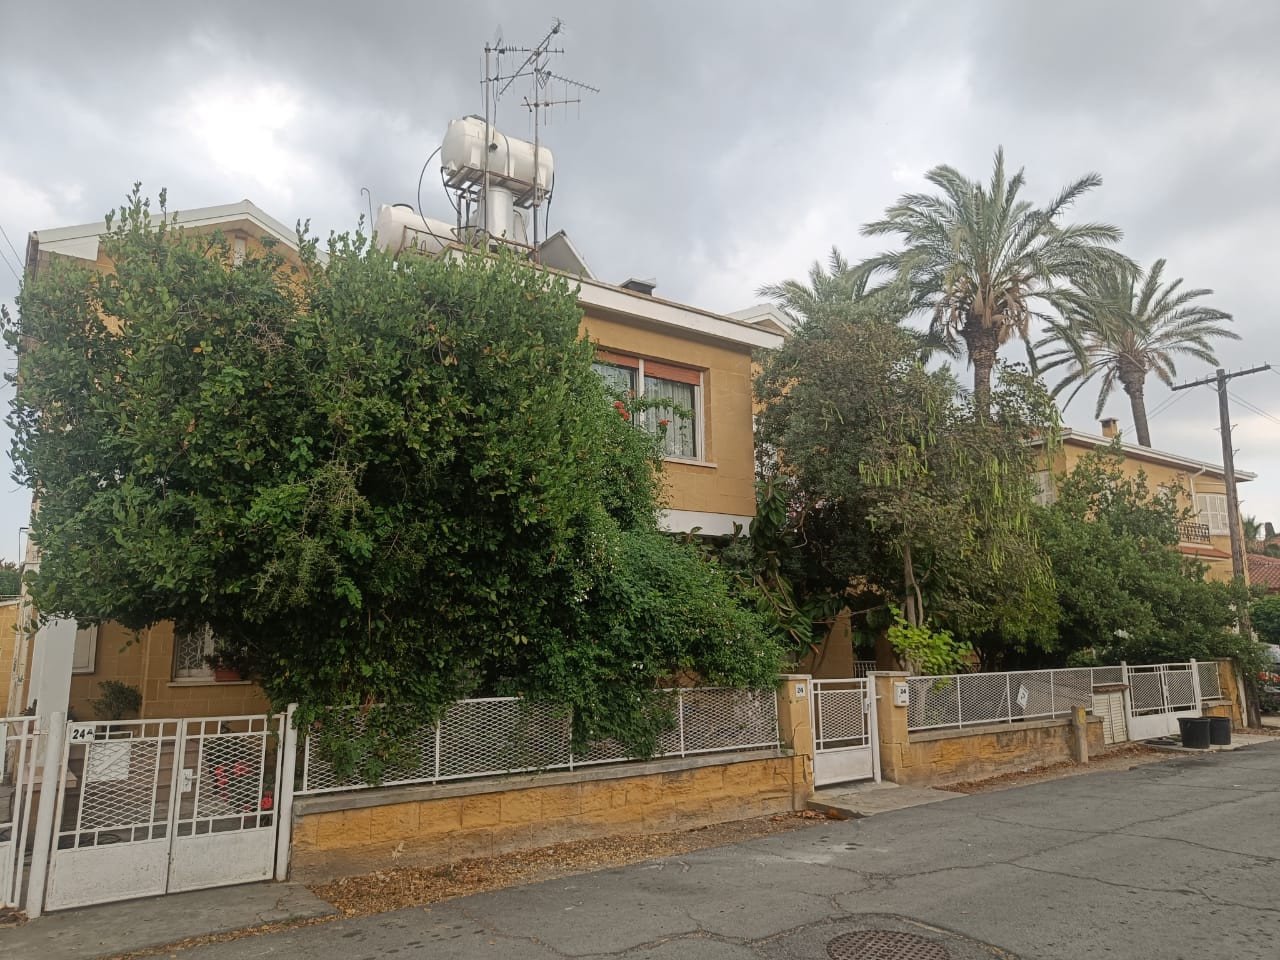 For Rent: Apartments, Agios Andreas, Nicosia, Cyprus FC-38861 - #4